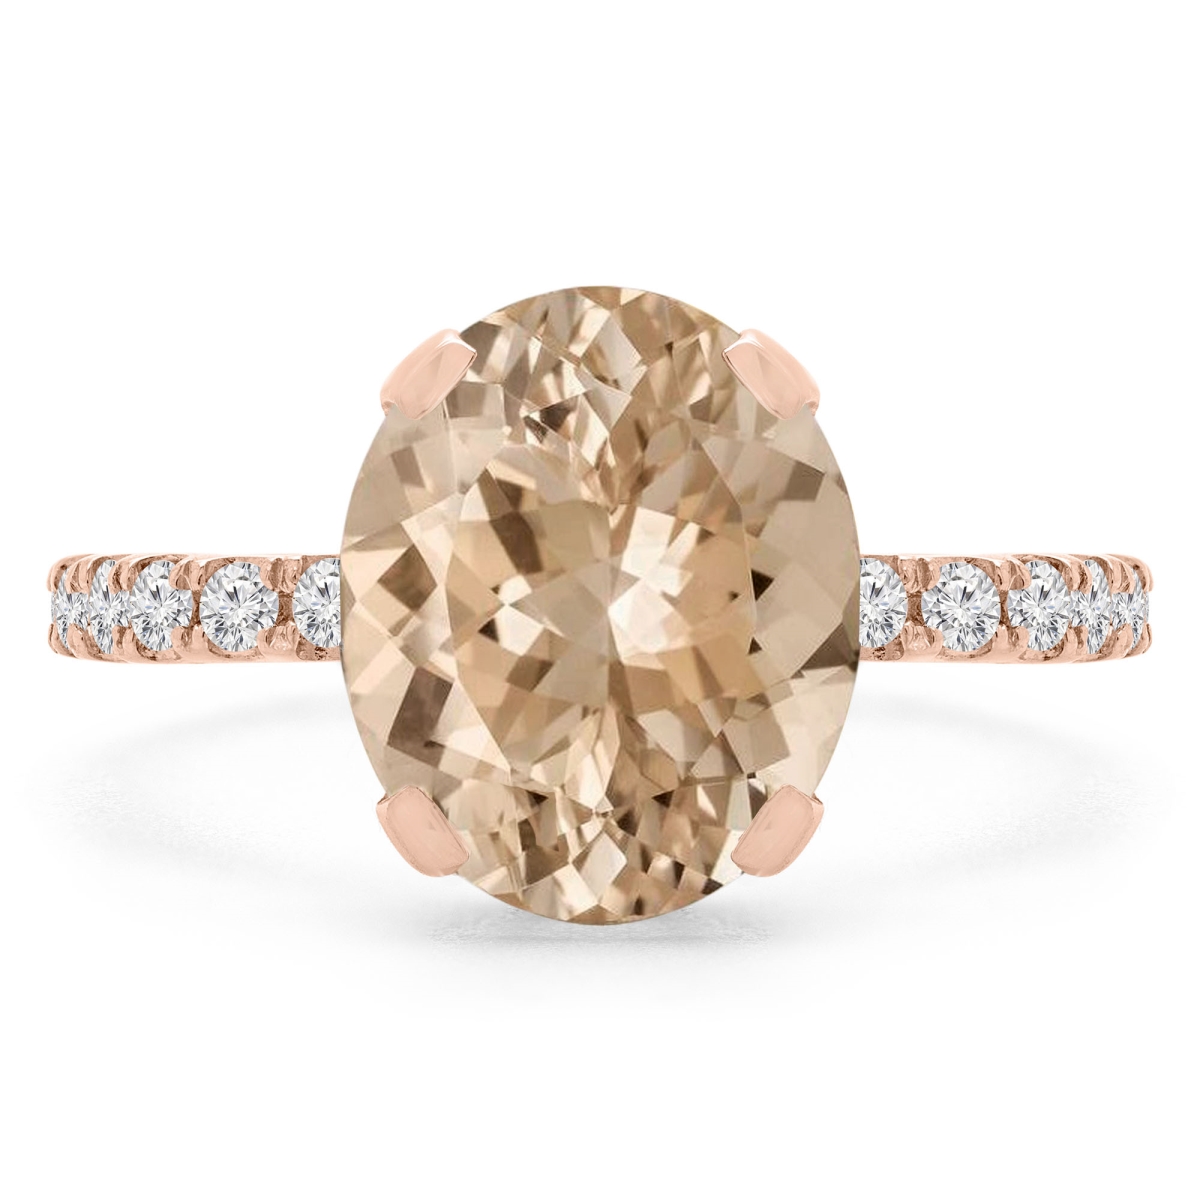 Picture of Majesty Diamonds MD190407-7.25 3.4 CTW Oval Pink Morganite Under Halo Engagement Ring in 14K Rose Gold - Size 7.25